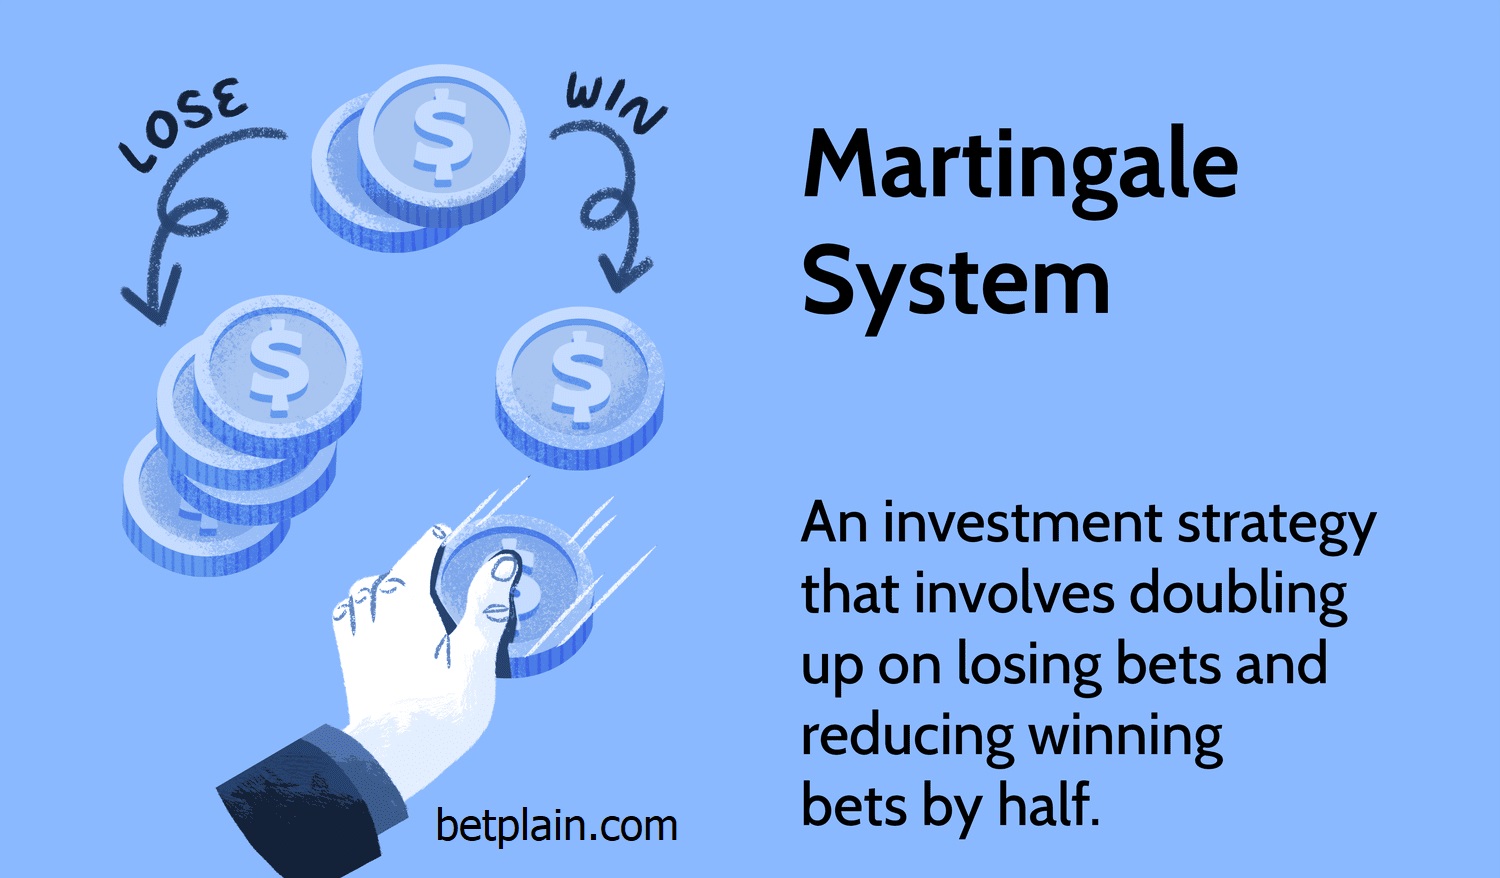 simple explain martingale system and strategy 